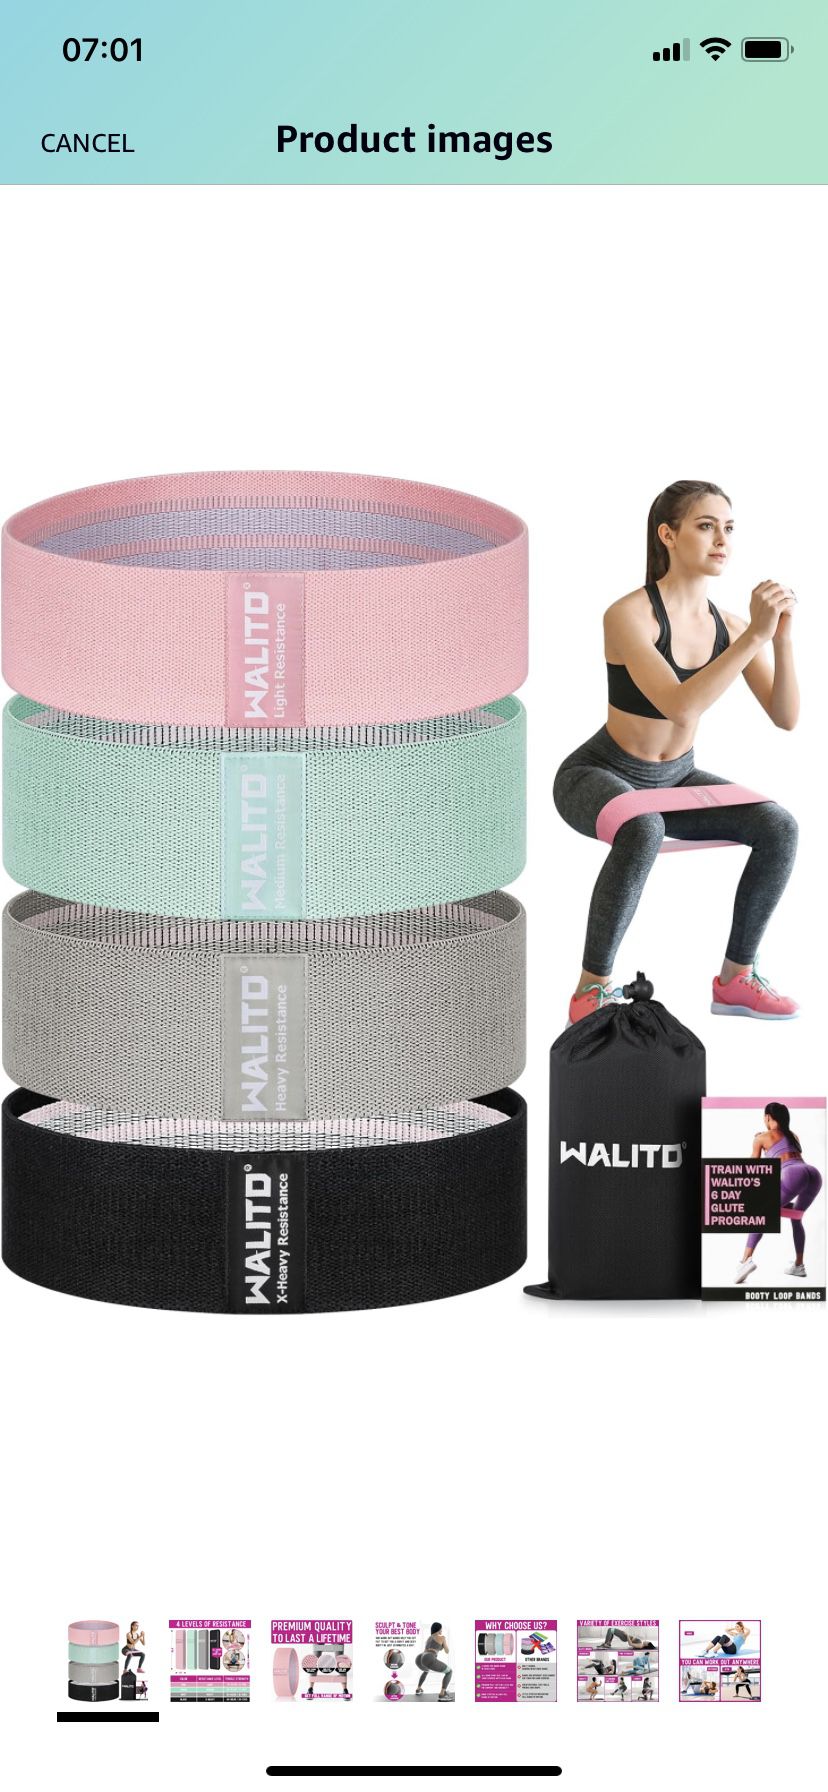 Resistance Bands for Working Out - Booty Bands for Women Men, Fabric Exercise Bands for Legs and Butt, Thigh Bands for Fitness, Gym, Home Workout Equi